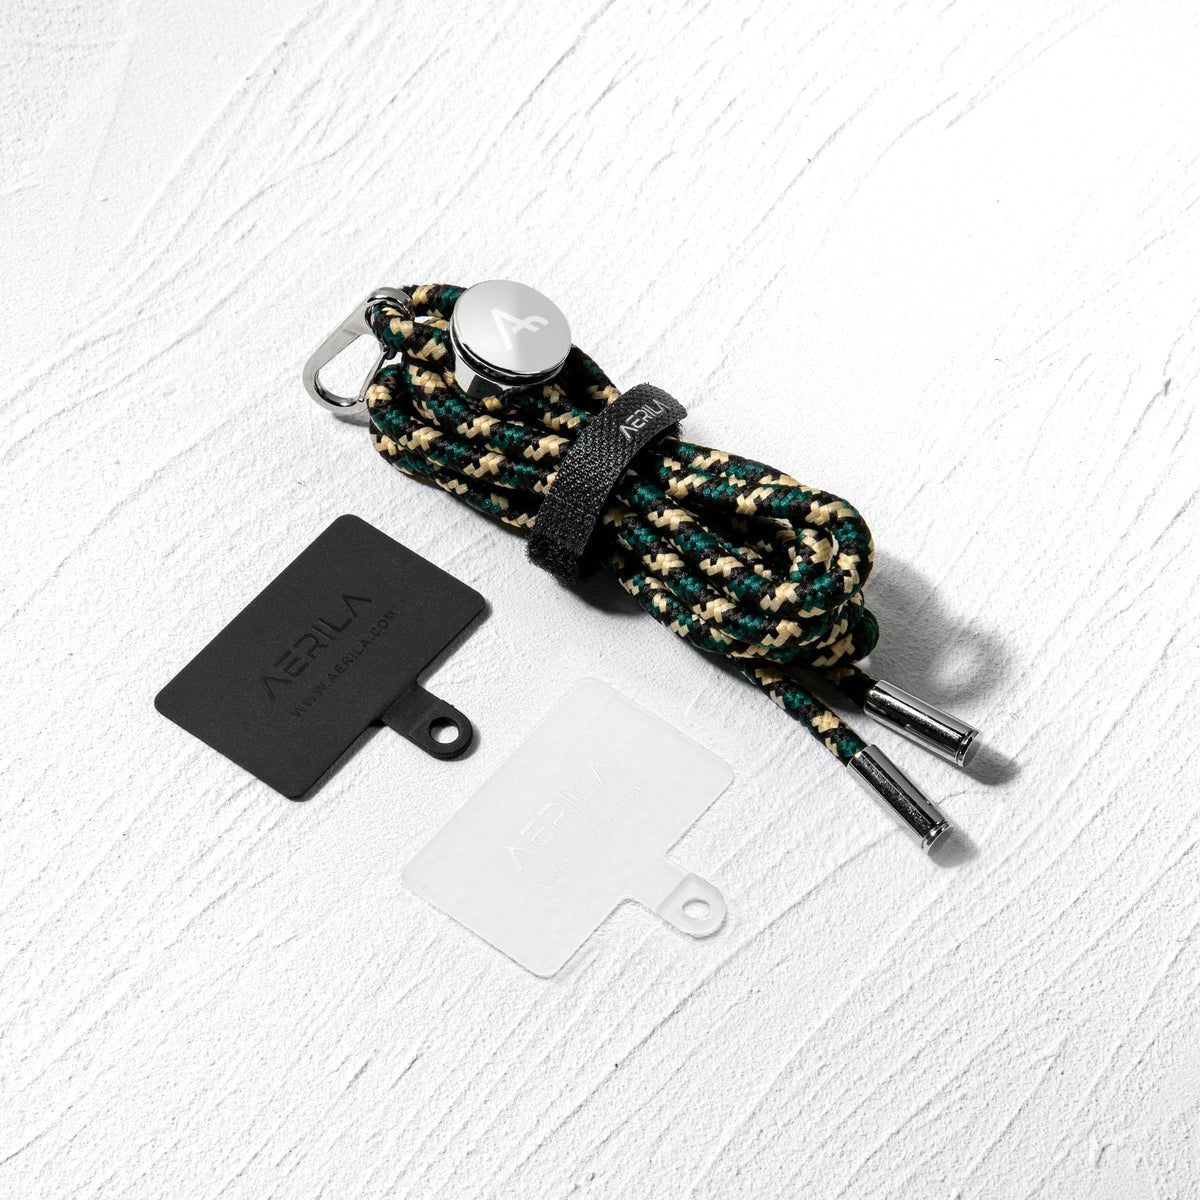 NORE Phone Lanyard set with Connector Patch Card | ADVENTURE Collection - AERILA